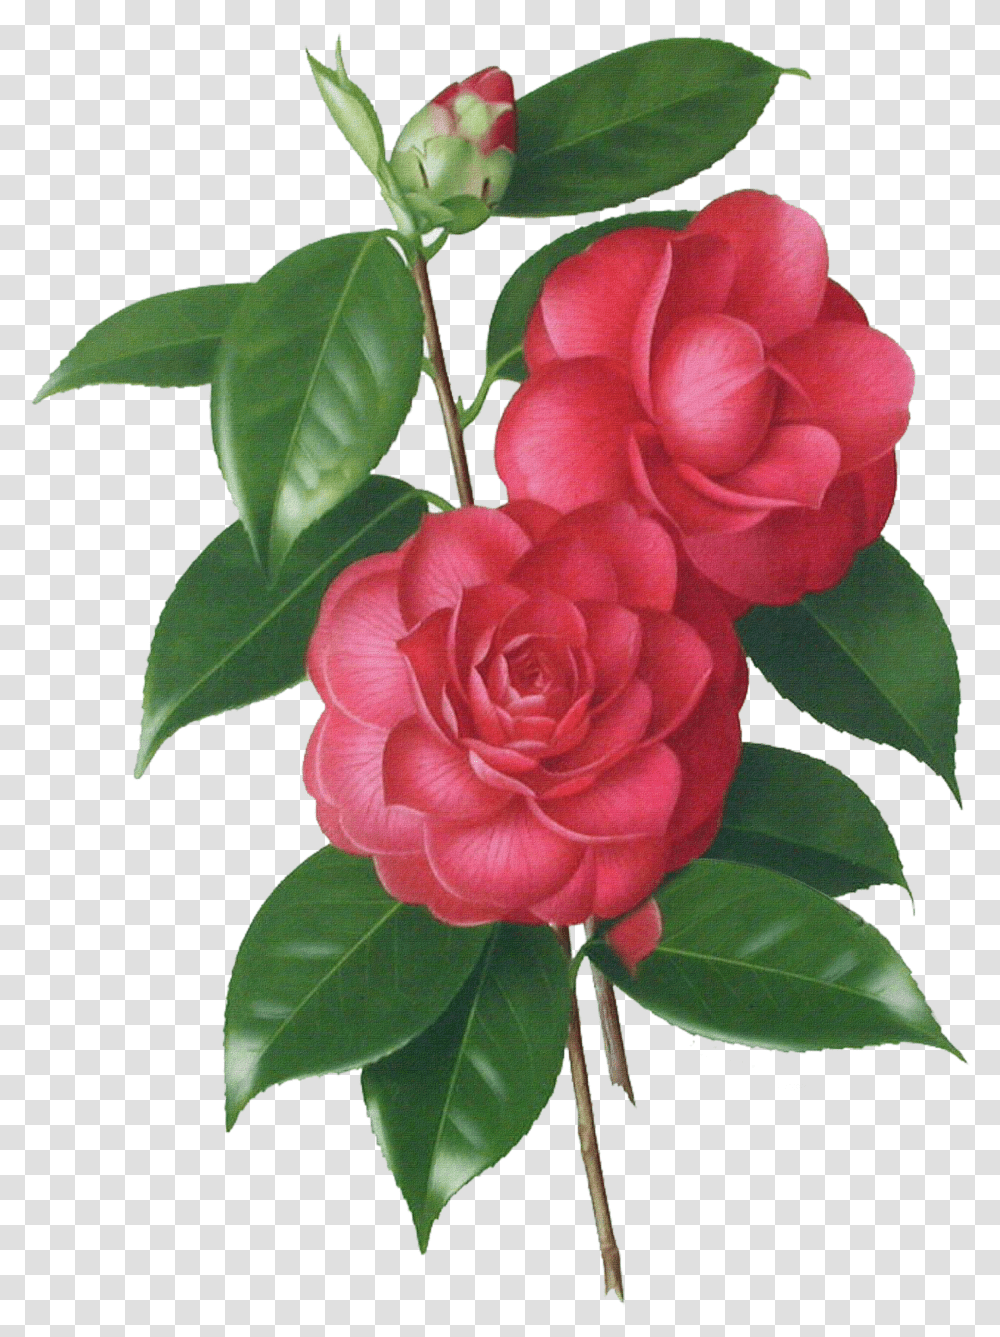 Graphic Stock Camellia Drawing Botanical Illustration Camellia Flower Drawing Transparent Png